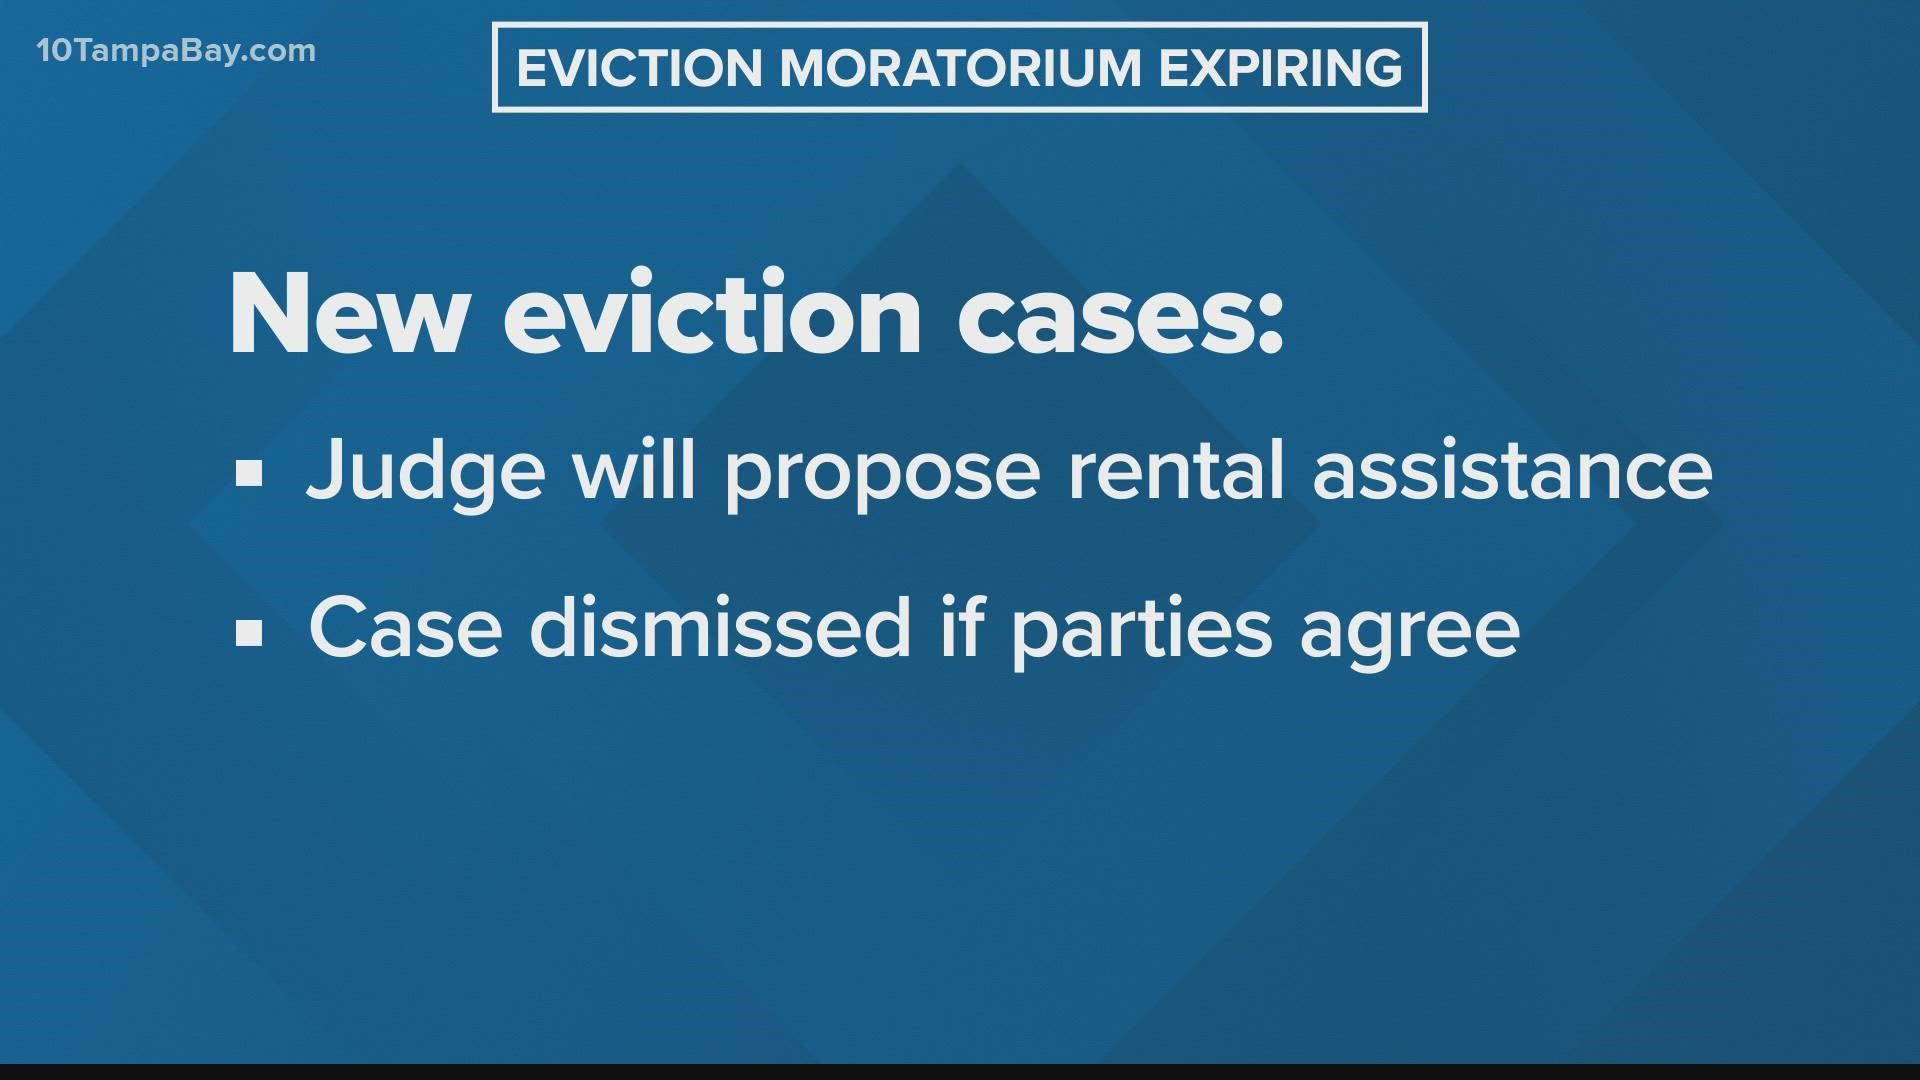 The nationwide eviction moratorium is set to expire Saturday.